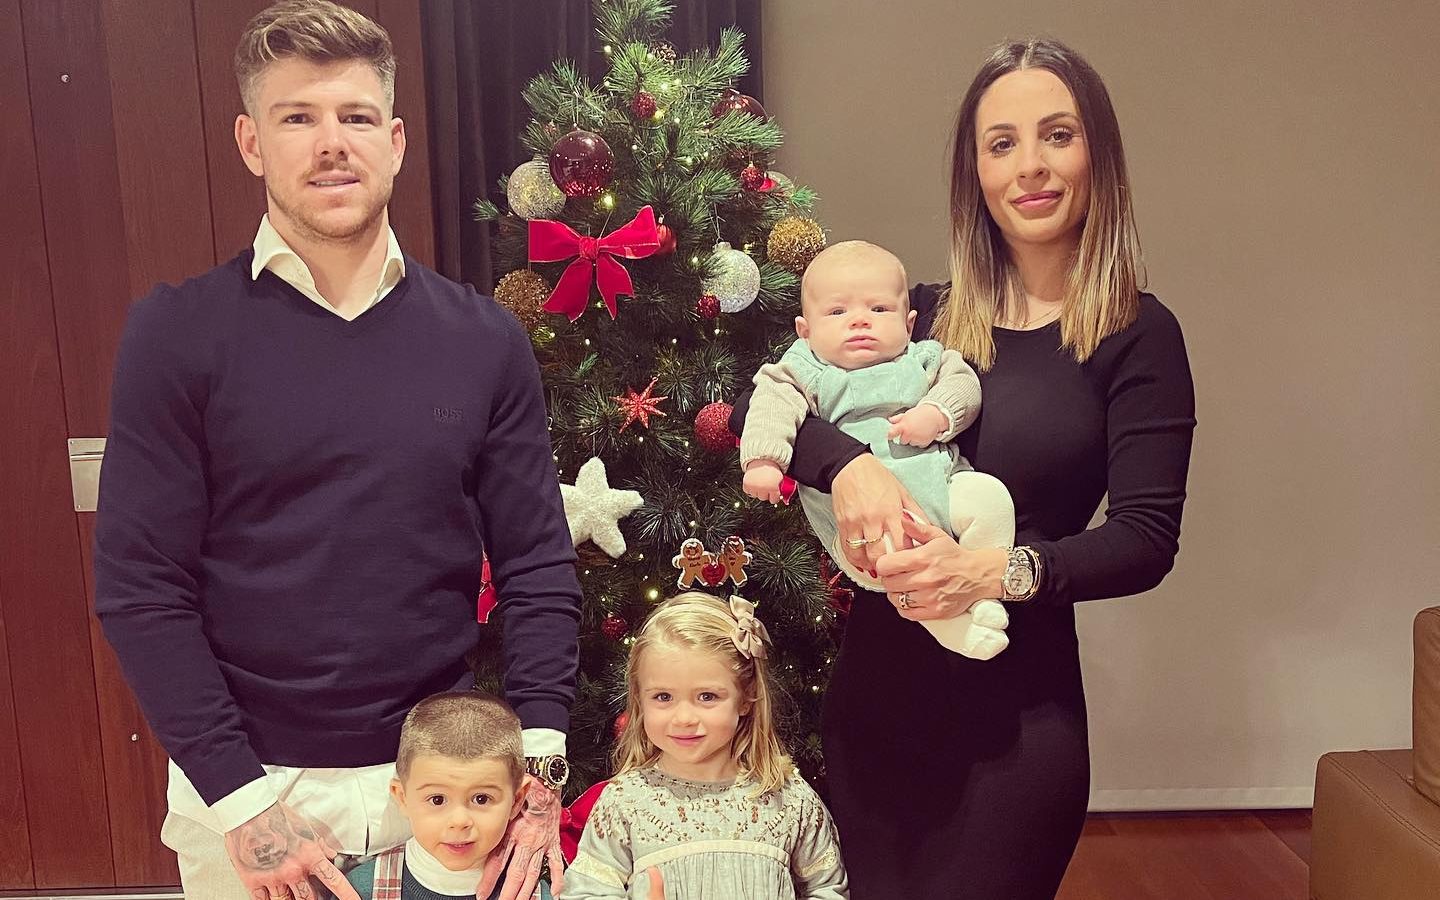 Alberto Moreno with his wife and children. (Credit: Instagram)